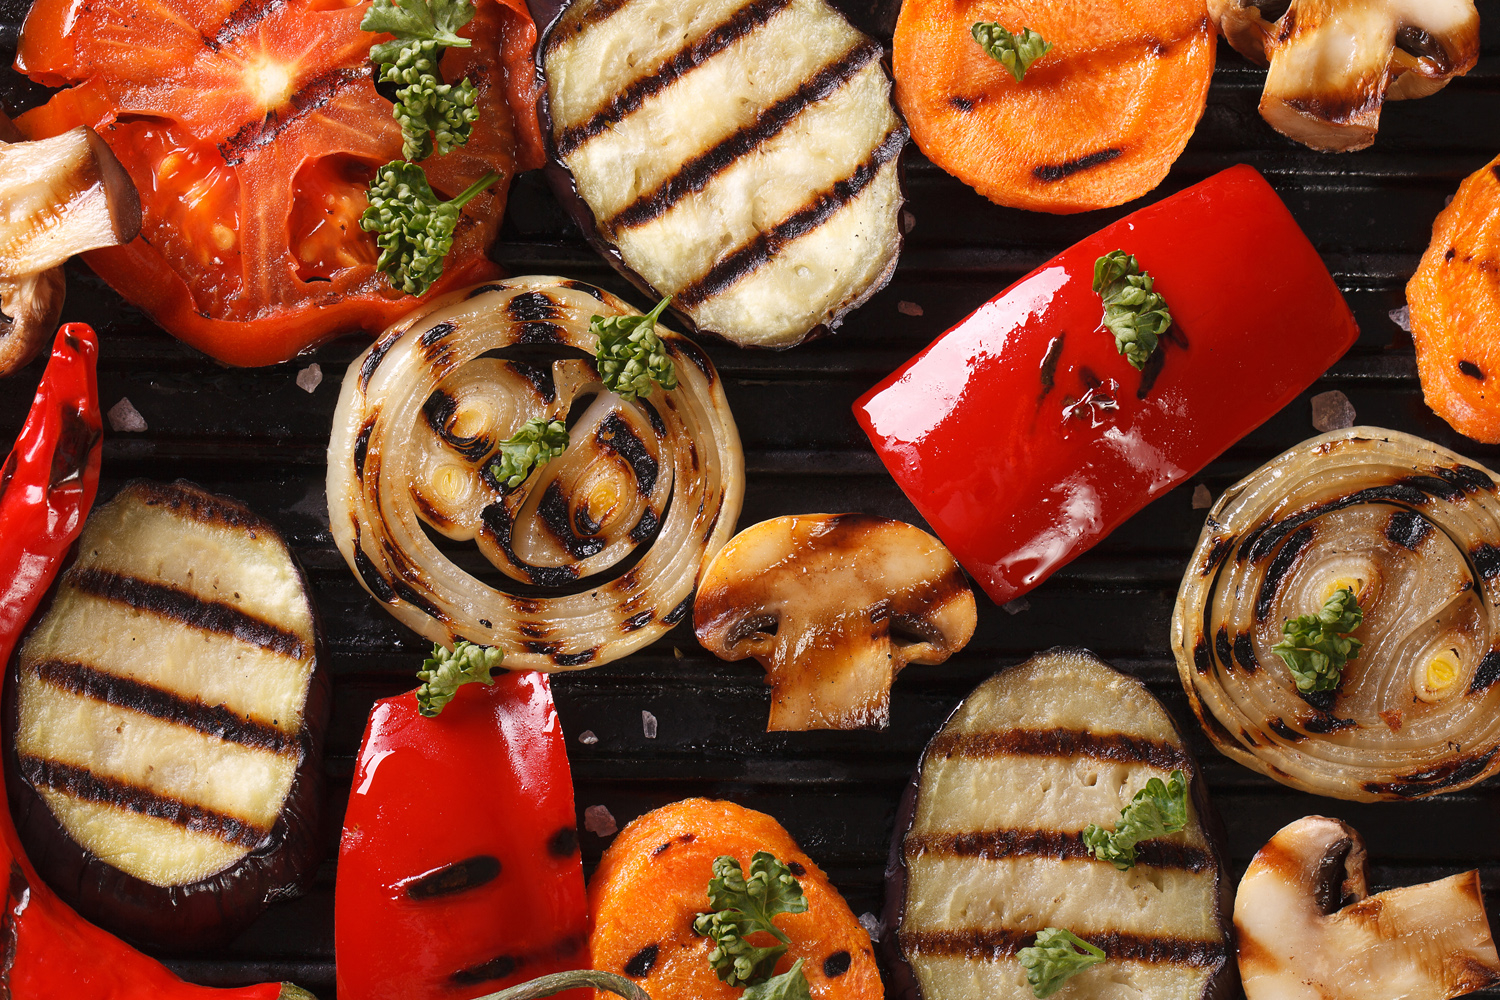 Have a Healthy BBQ! Don’t Skip Out on the Veggies.